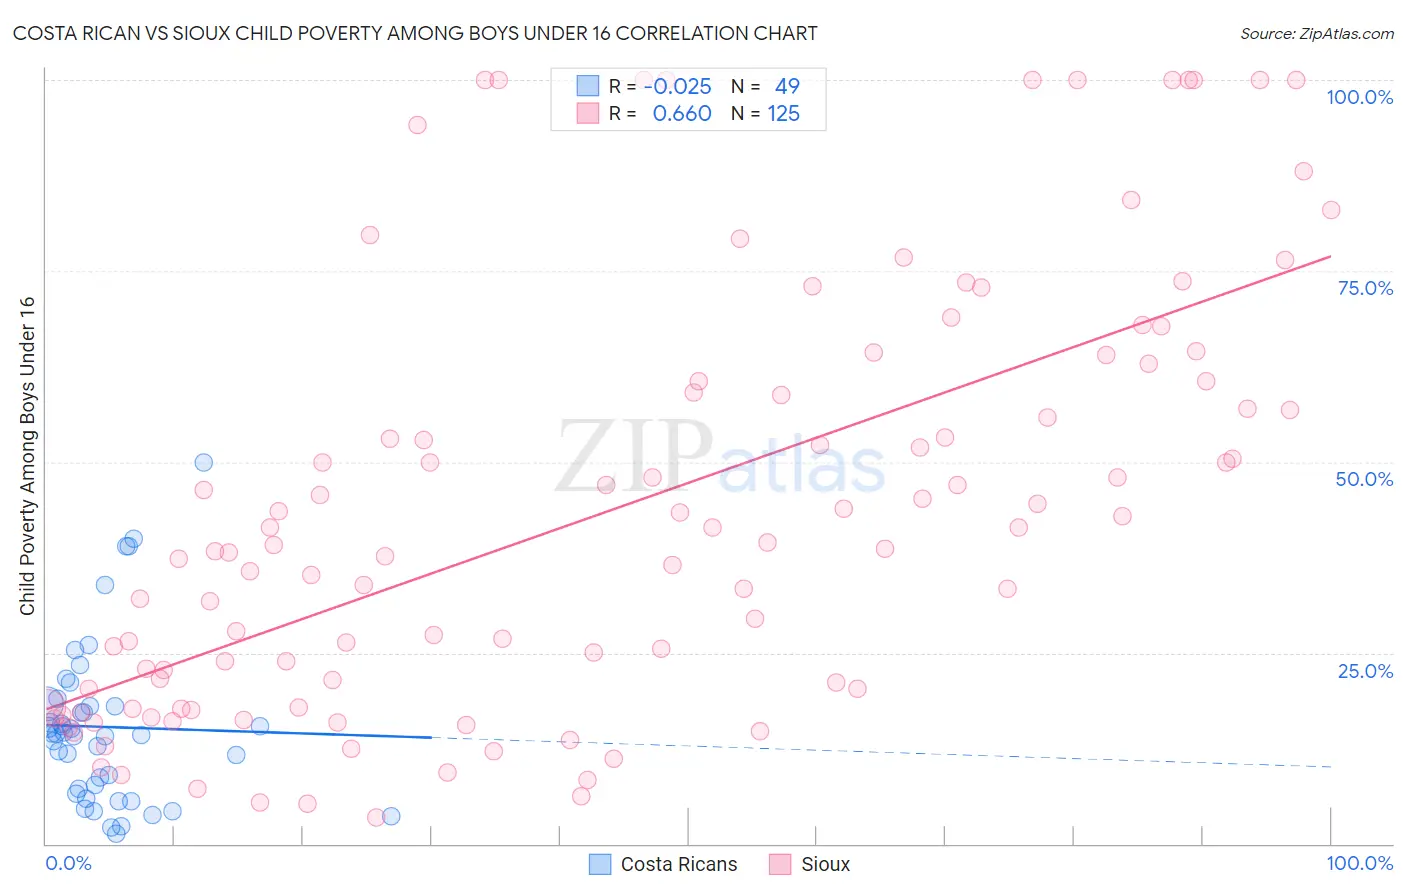 Costa Rican vs Sioux Child Poverty Among Boys Under 16